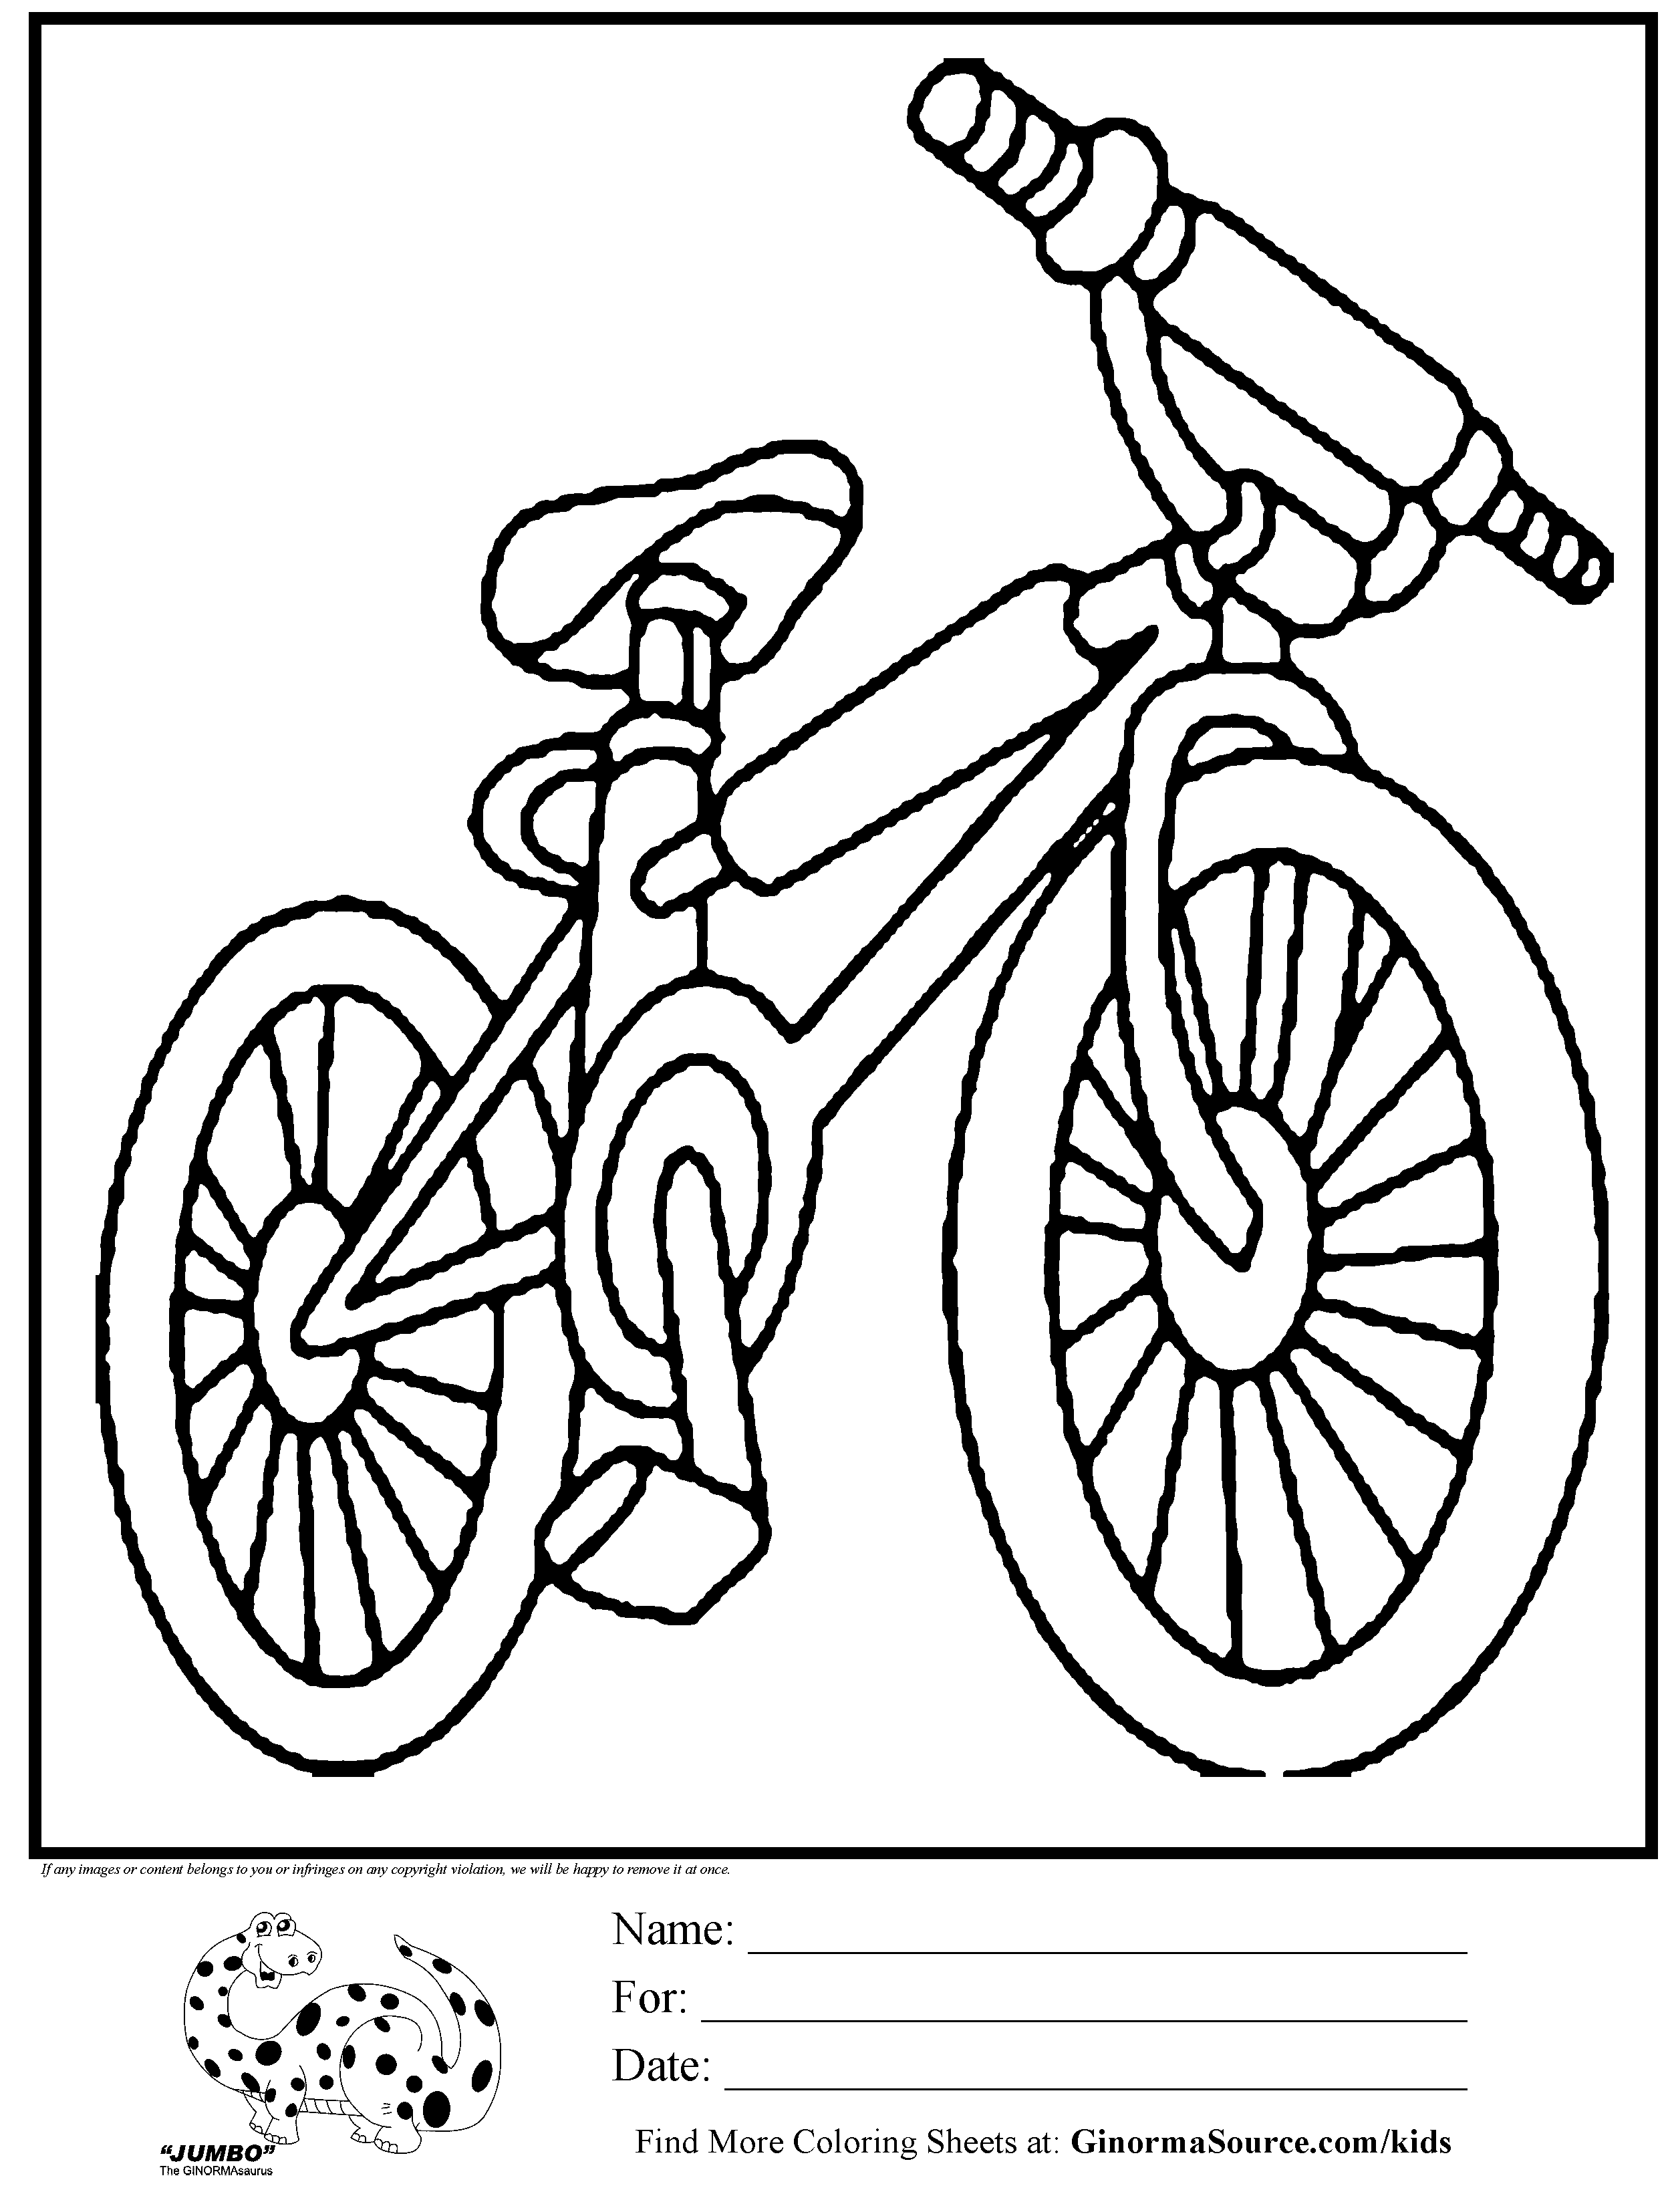 Olympic Colouring Page Bmx Bike Ginormasource Kids Coloring Pages Cool Coloring Pages